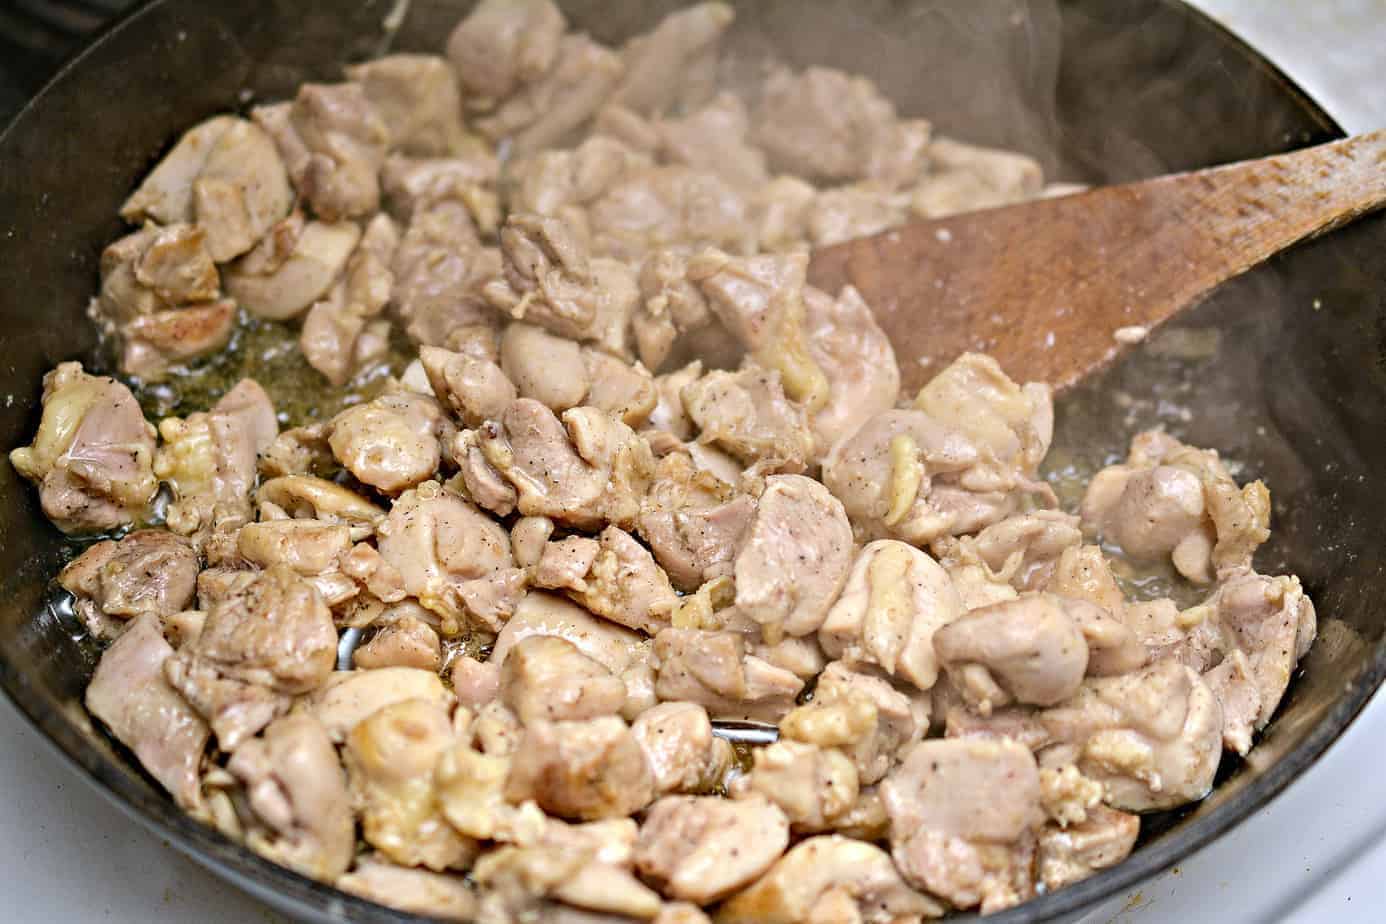 Stir the chicken frequently and fully incorporate.